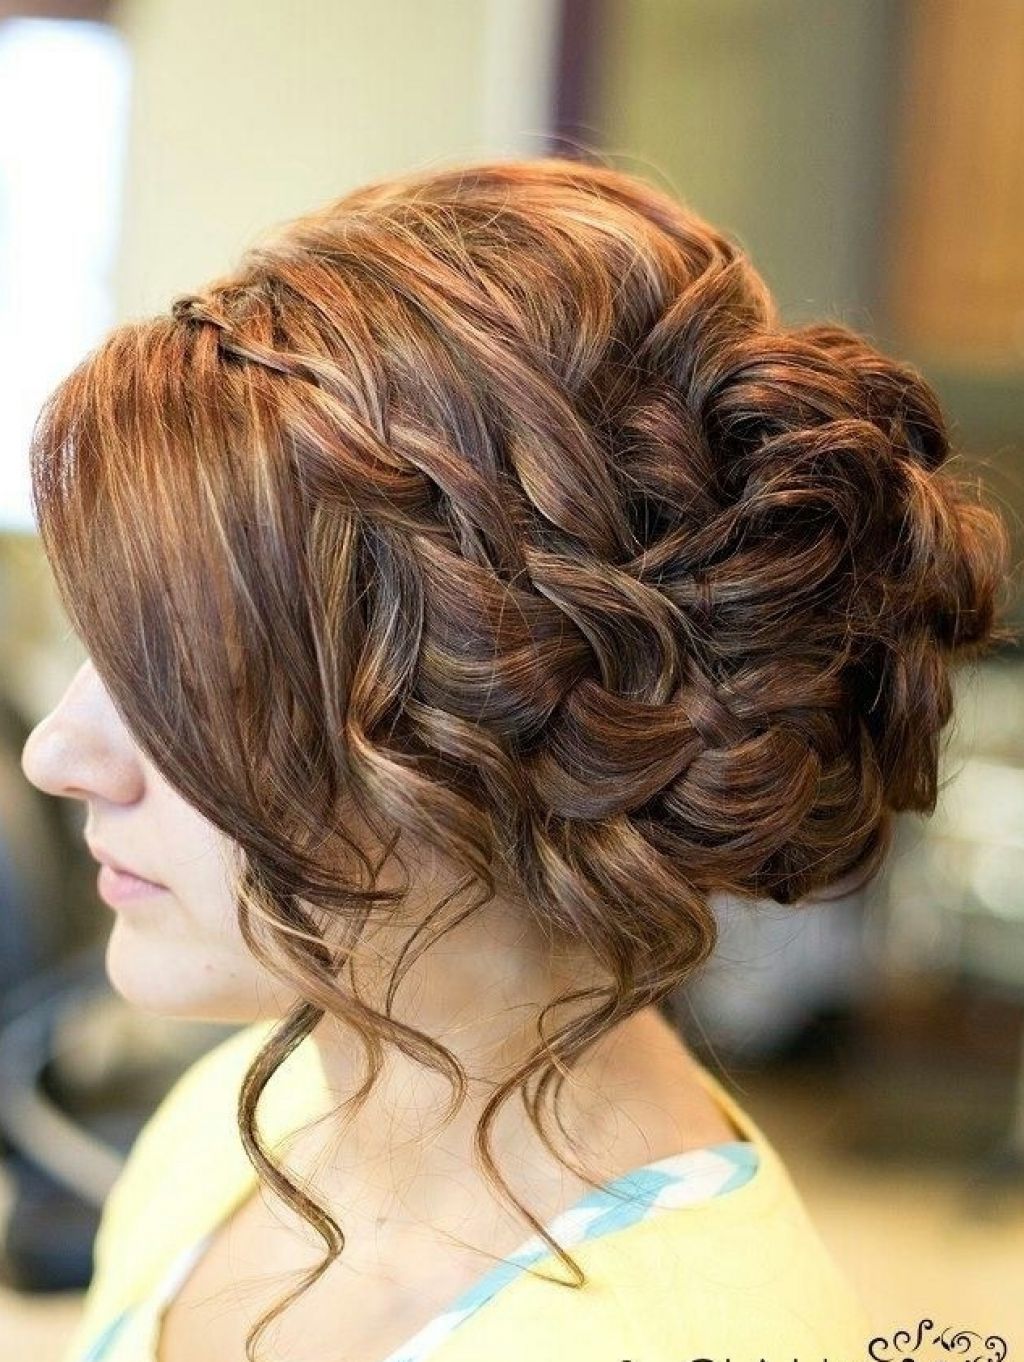 14 Prom Hairstyles For Long Hair That Are Simply Adorable